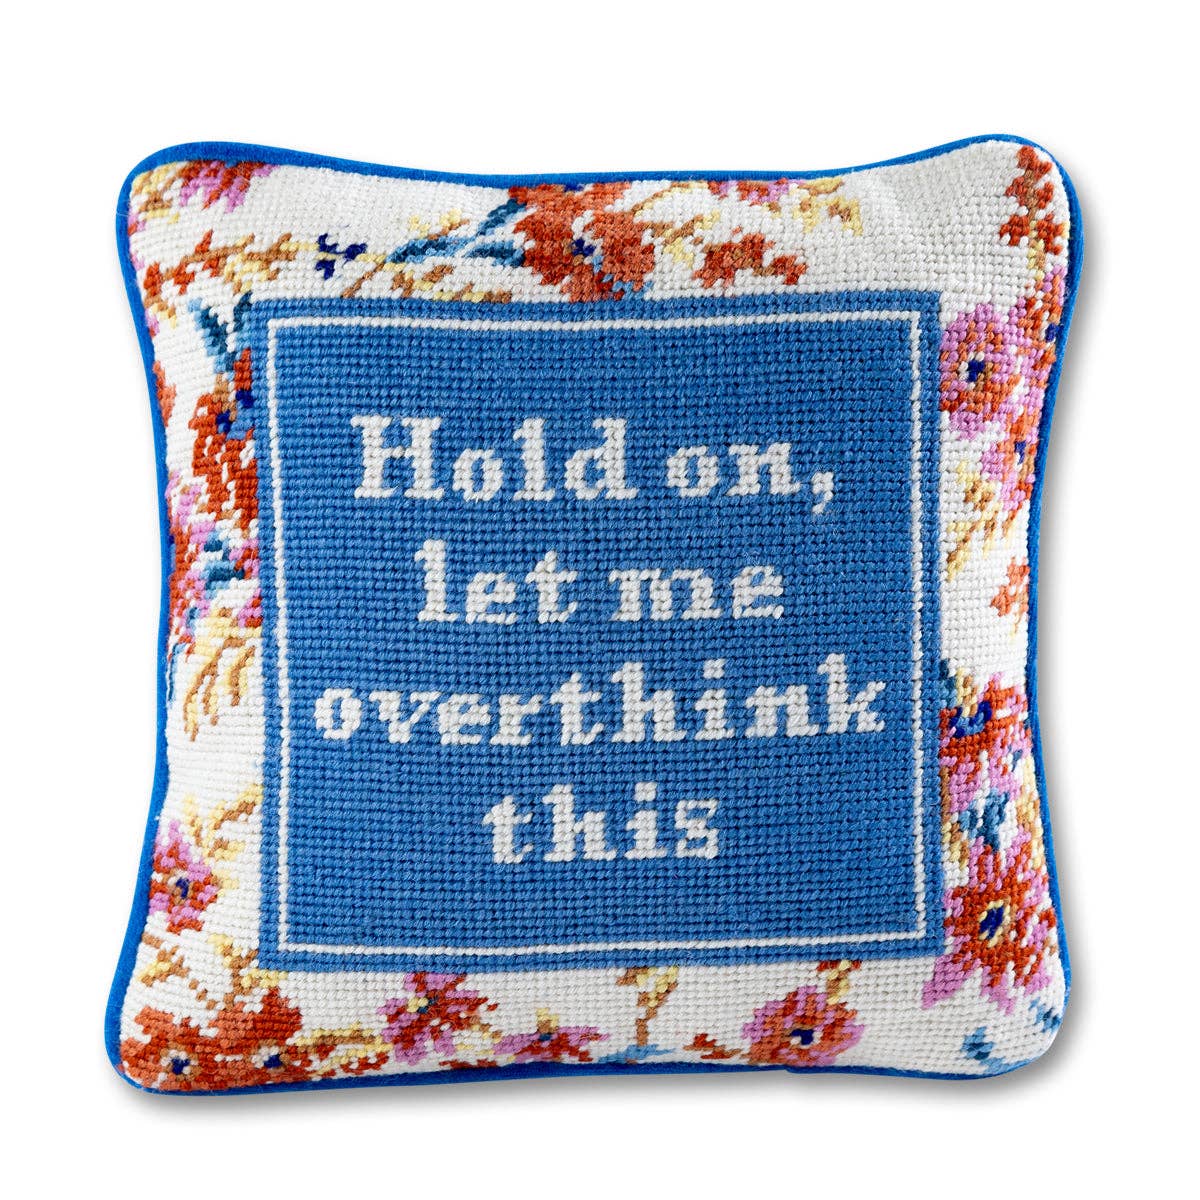 Overthink Needlepoint Pillow - The Preppy Bunny